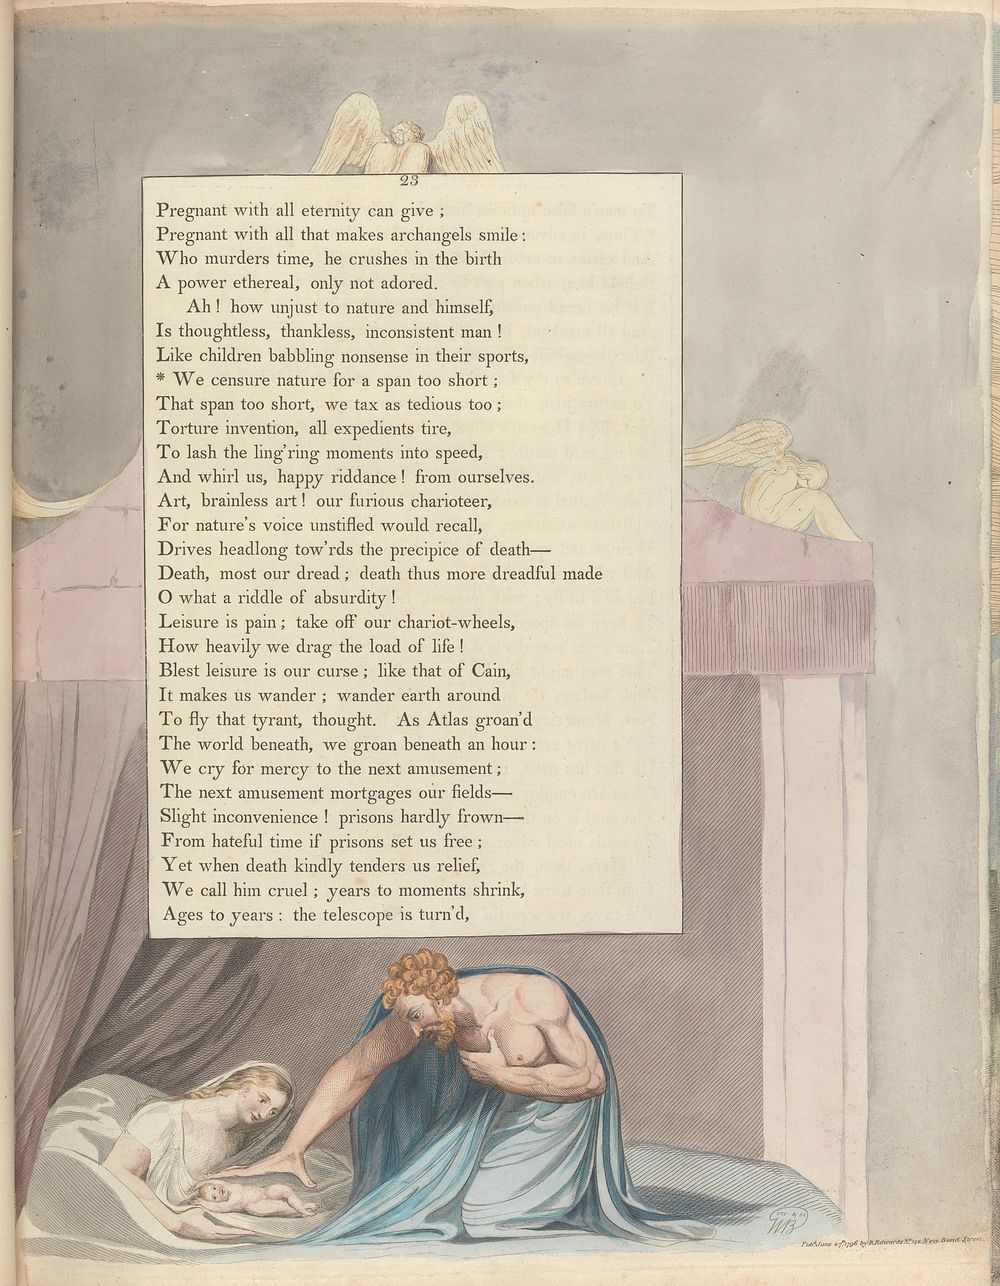 Young's Night Thoughts, Page 23, "We censure nature for a span too short" by William Blake.